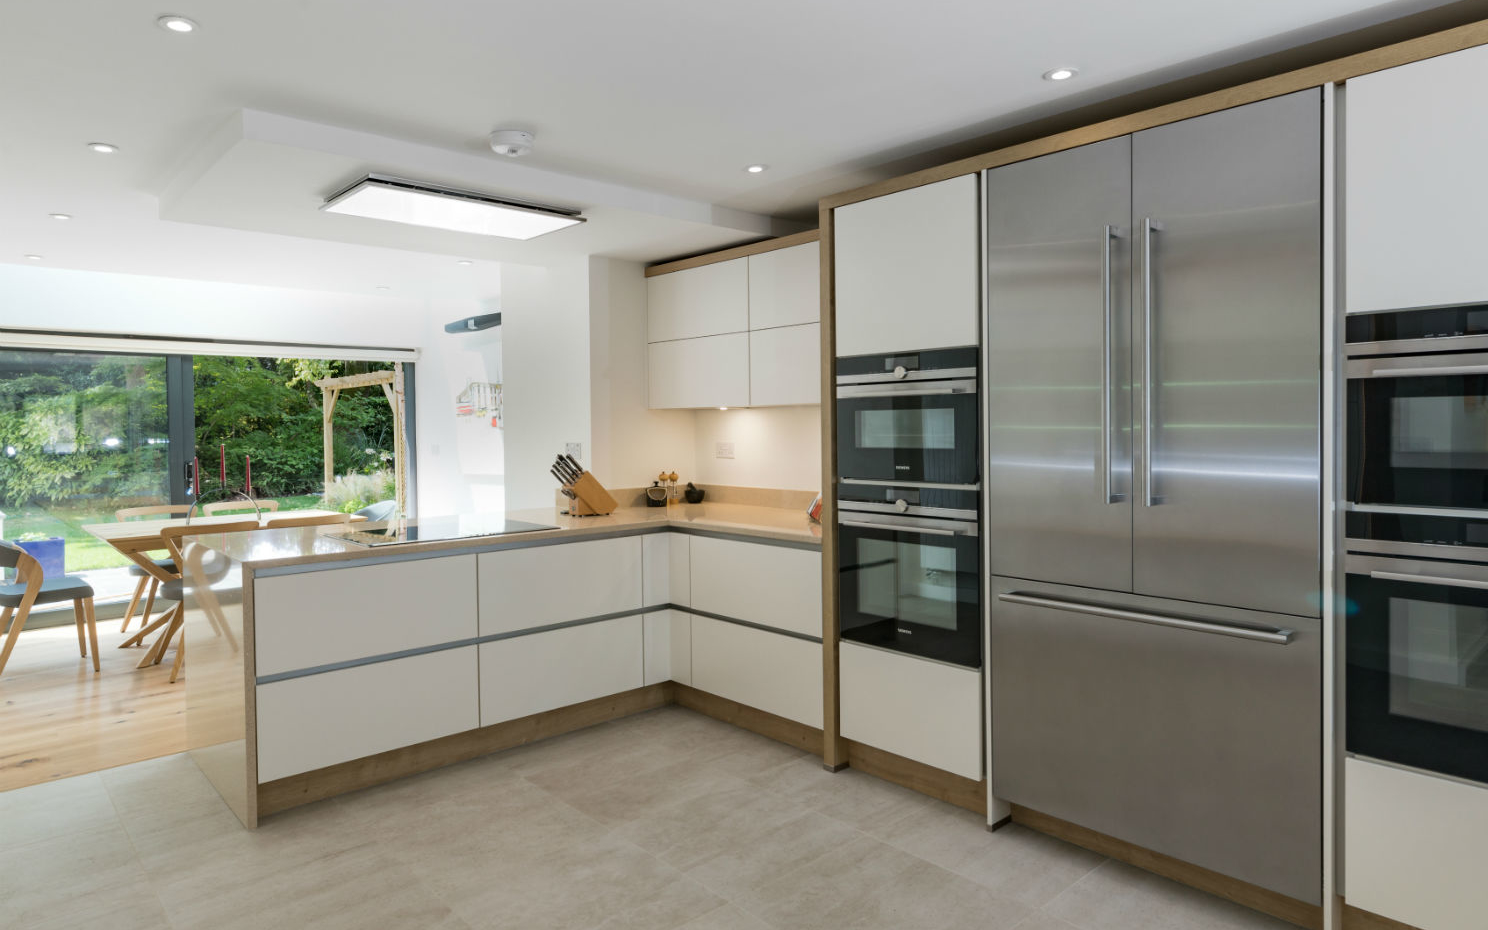 Elan delivers video content for Eco German Kitchens